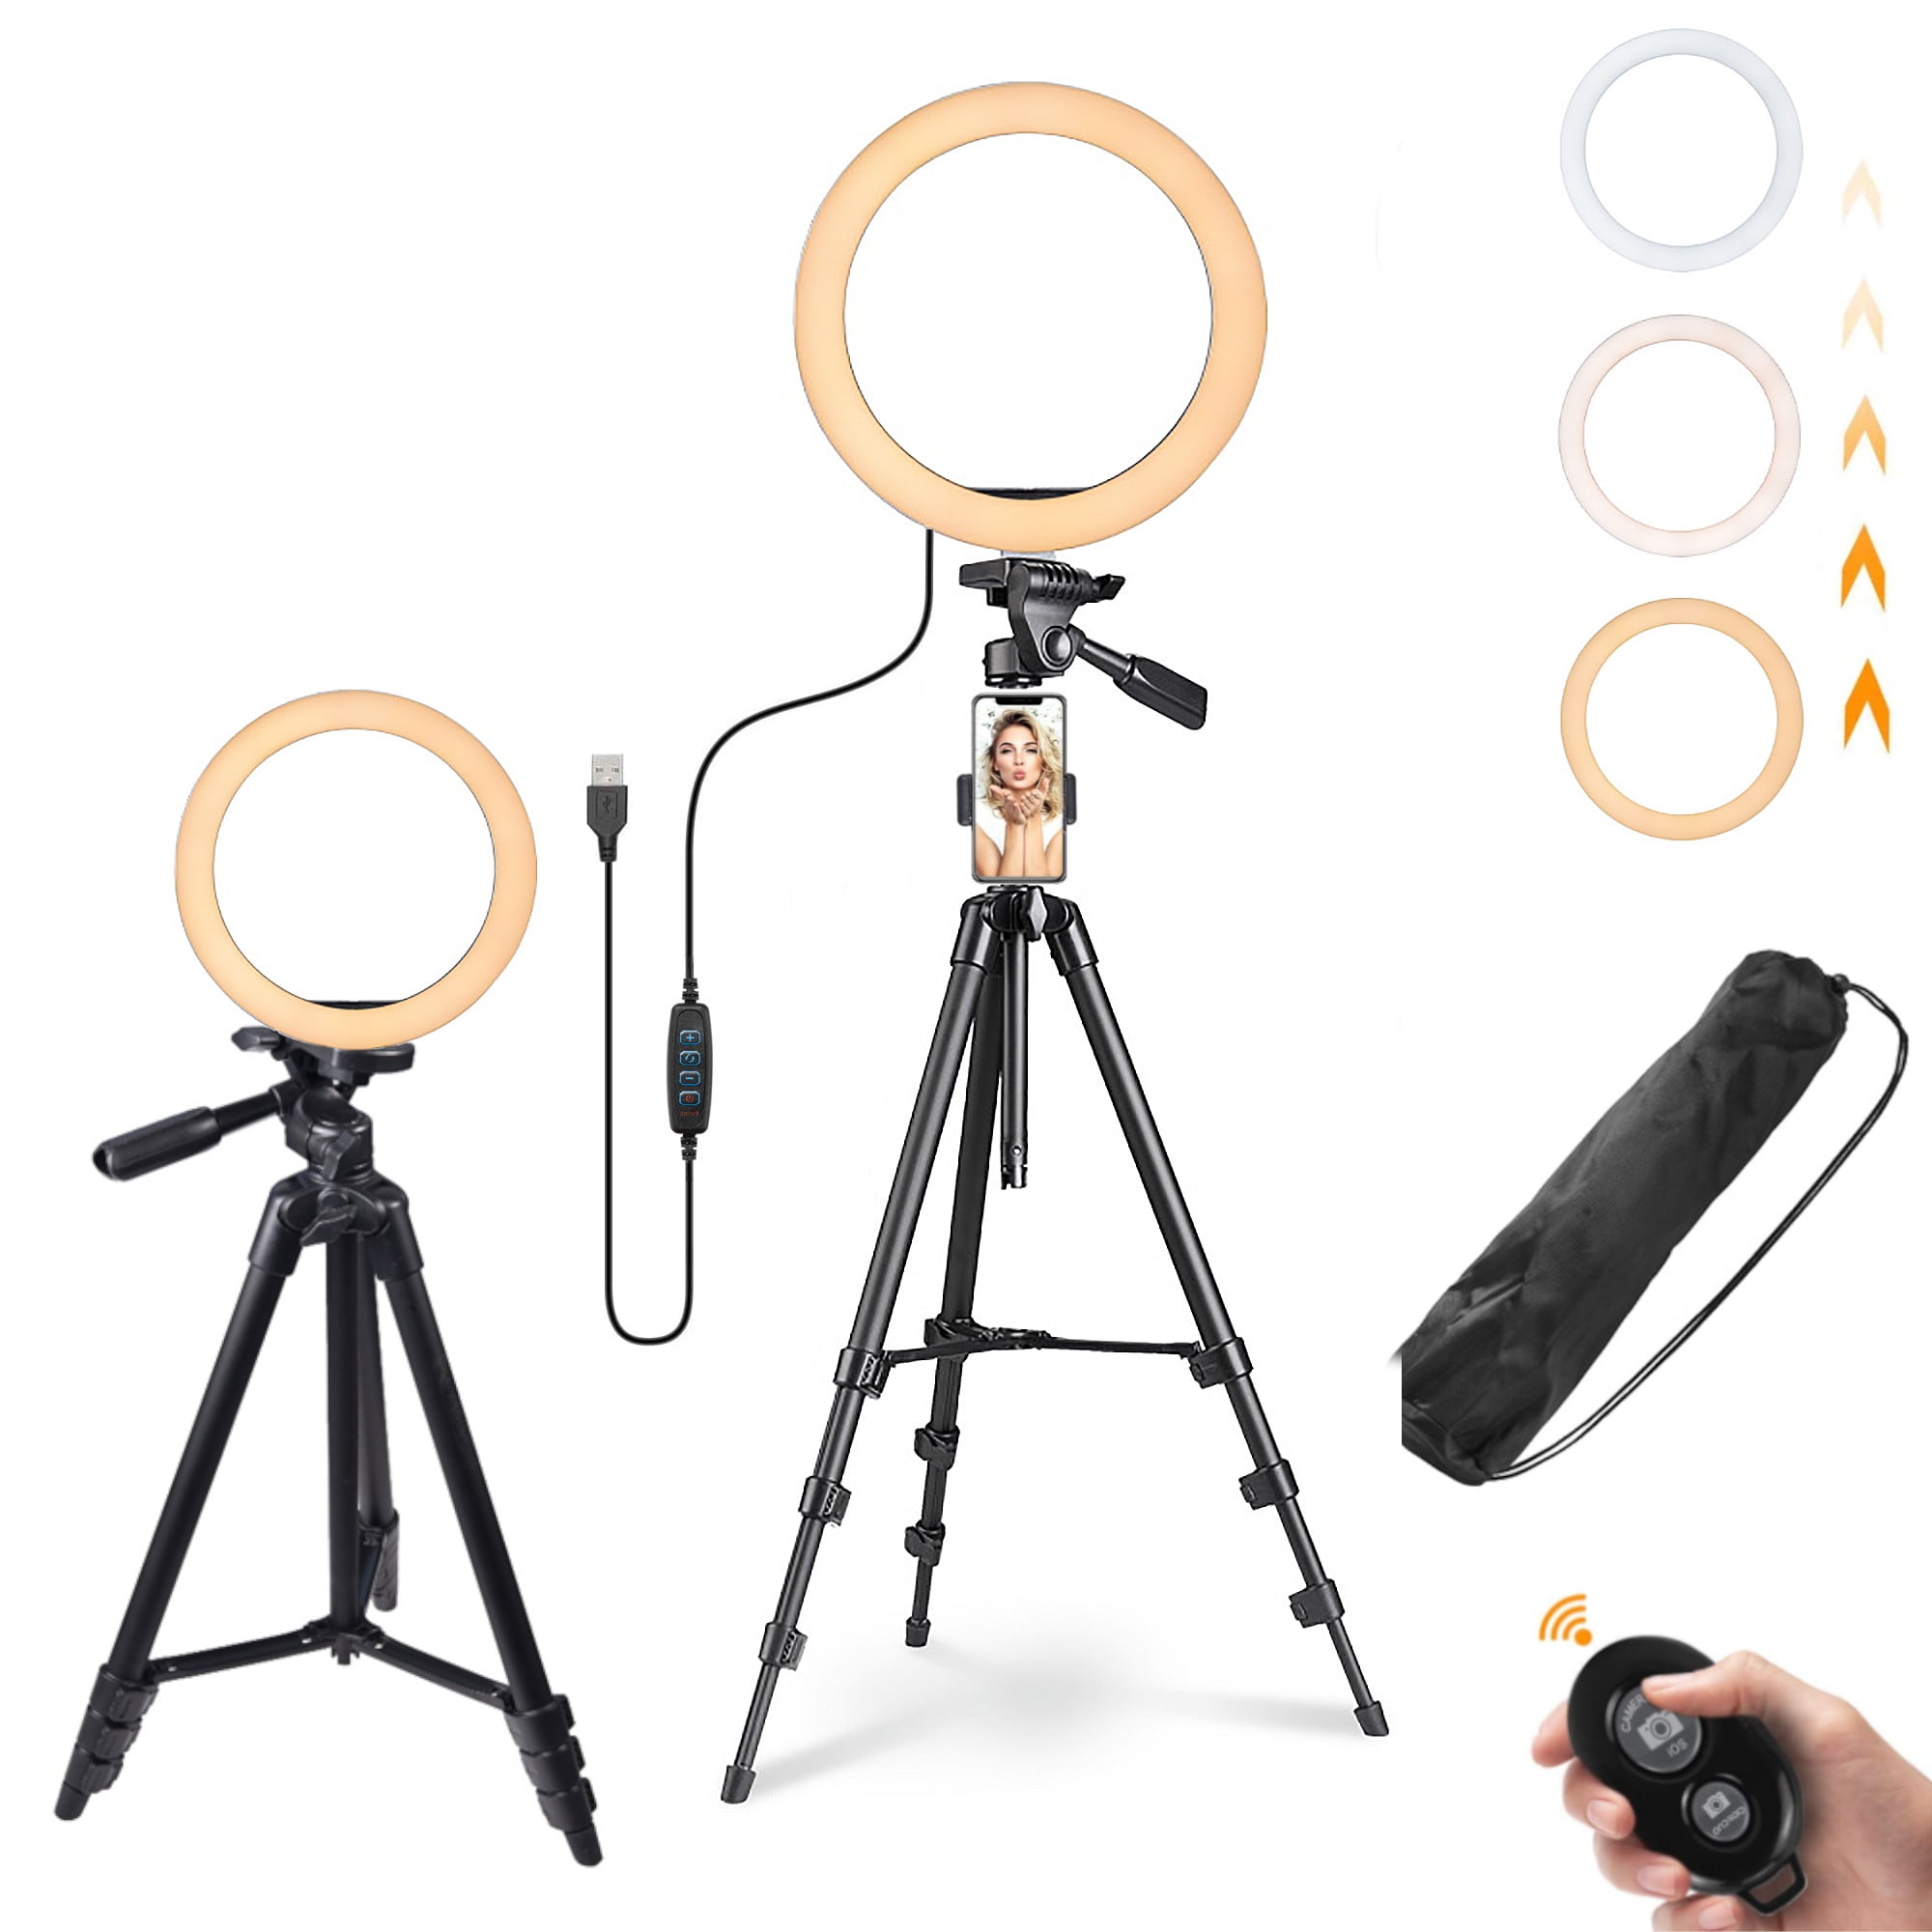 10.2 Selfie Ring Light 29 Colors Metal RGB Ring Light with 61'' Adjustable Tripod Stand/Desktop Stand/ Phone Holder for Live Stream/Makeup/YouTube/TikTok Compatible with iOS/Android Phones